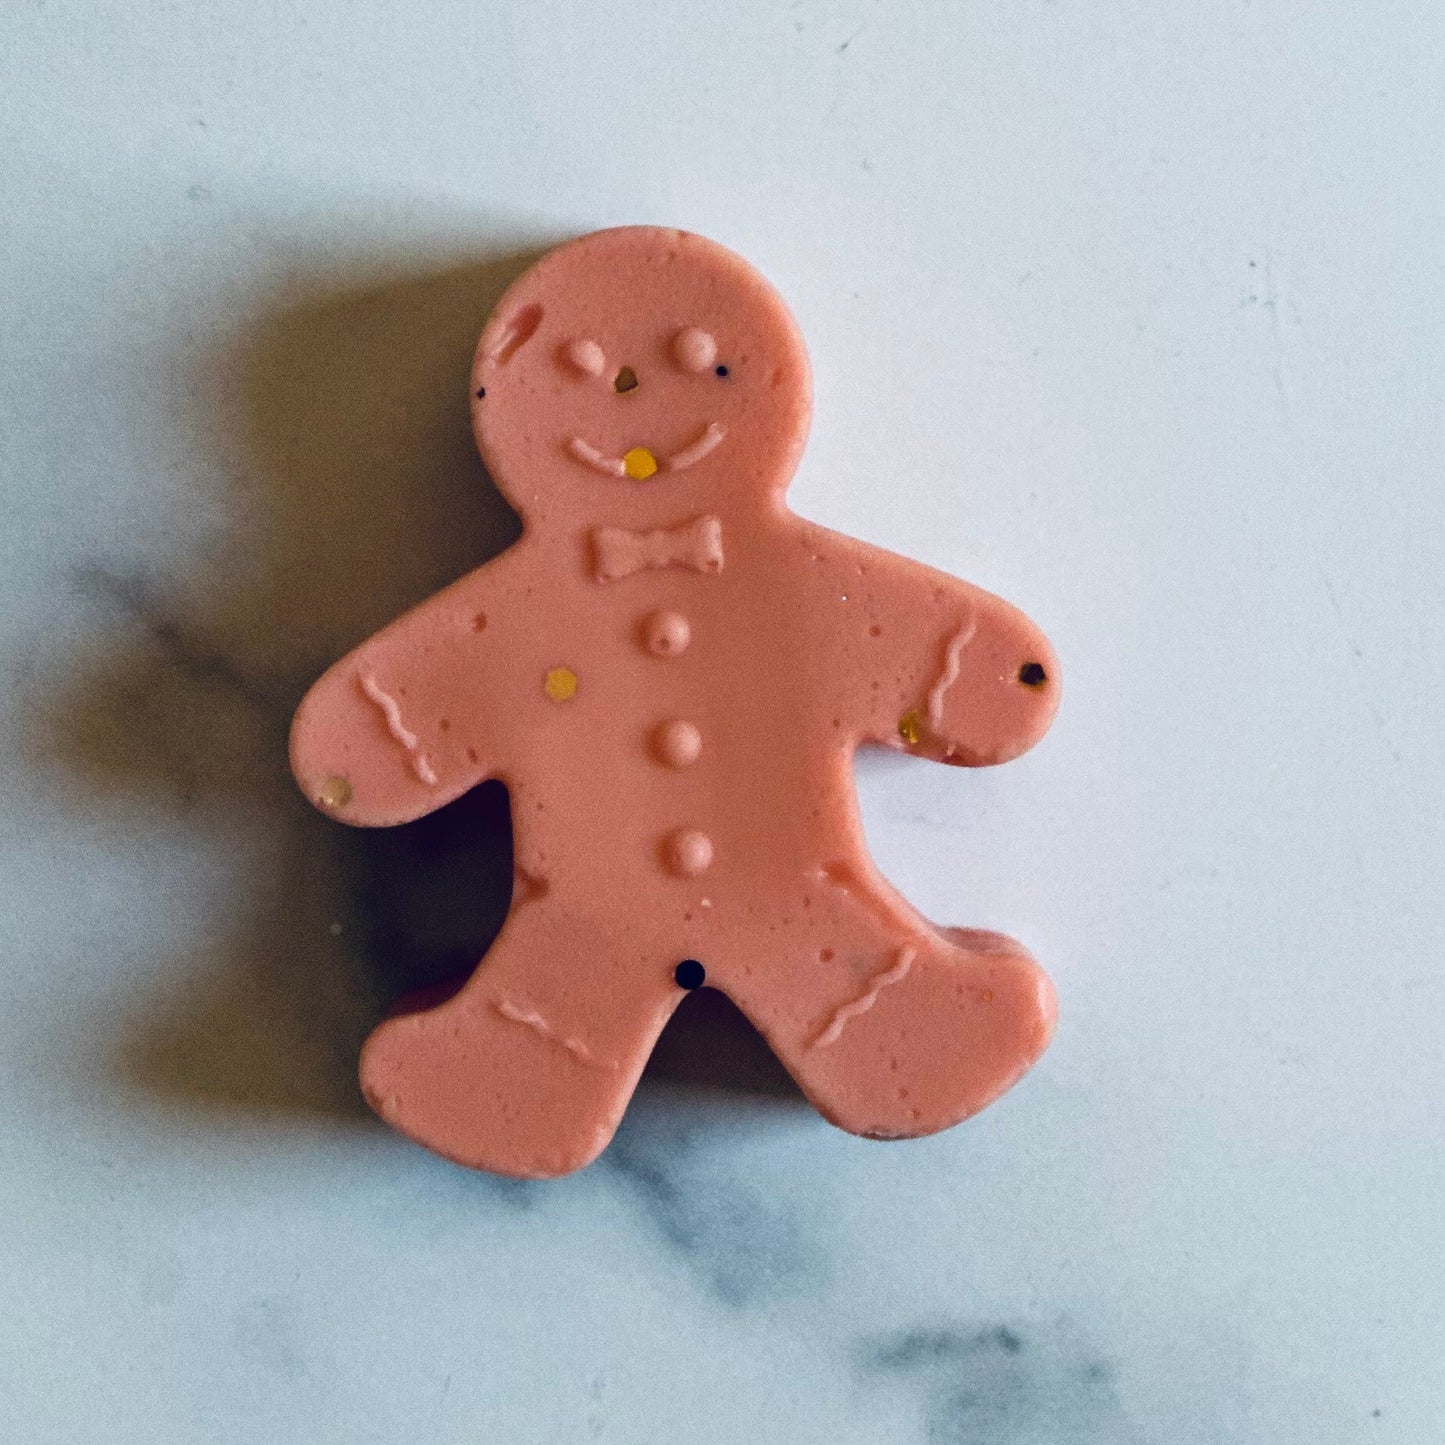 Are You Serious Clark? (Gingerbread Single)